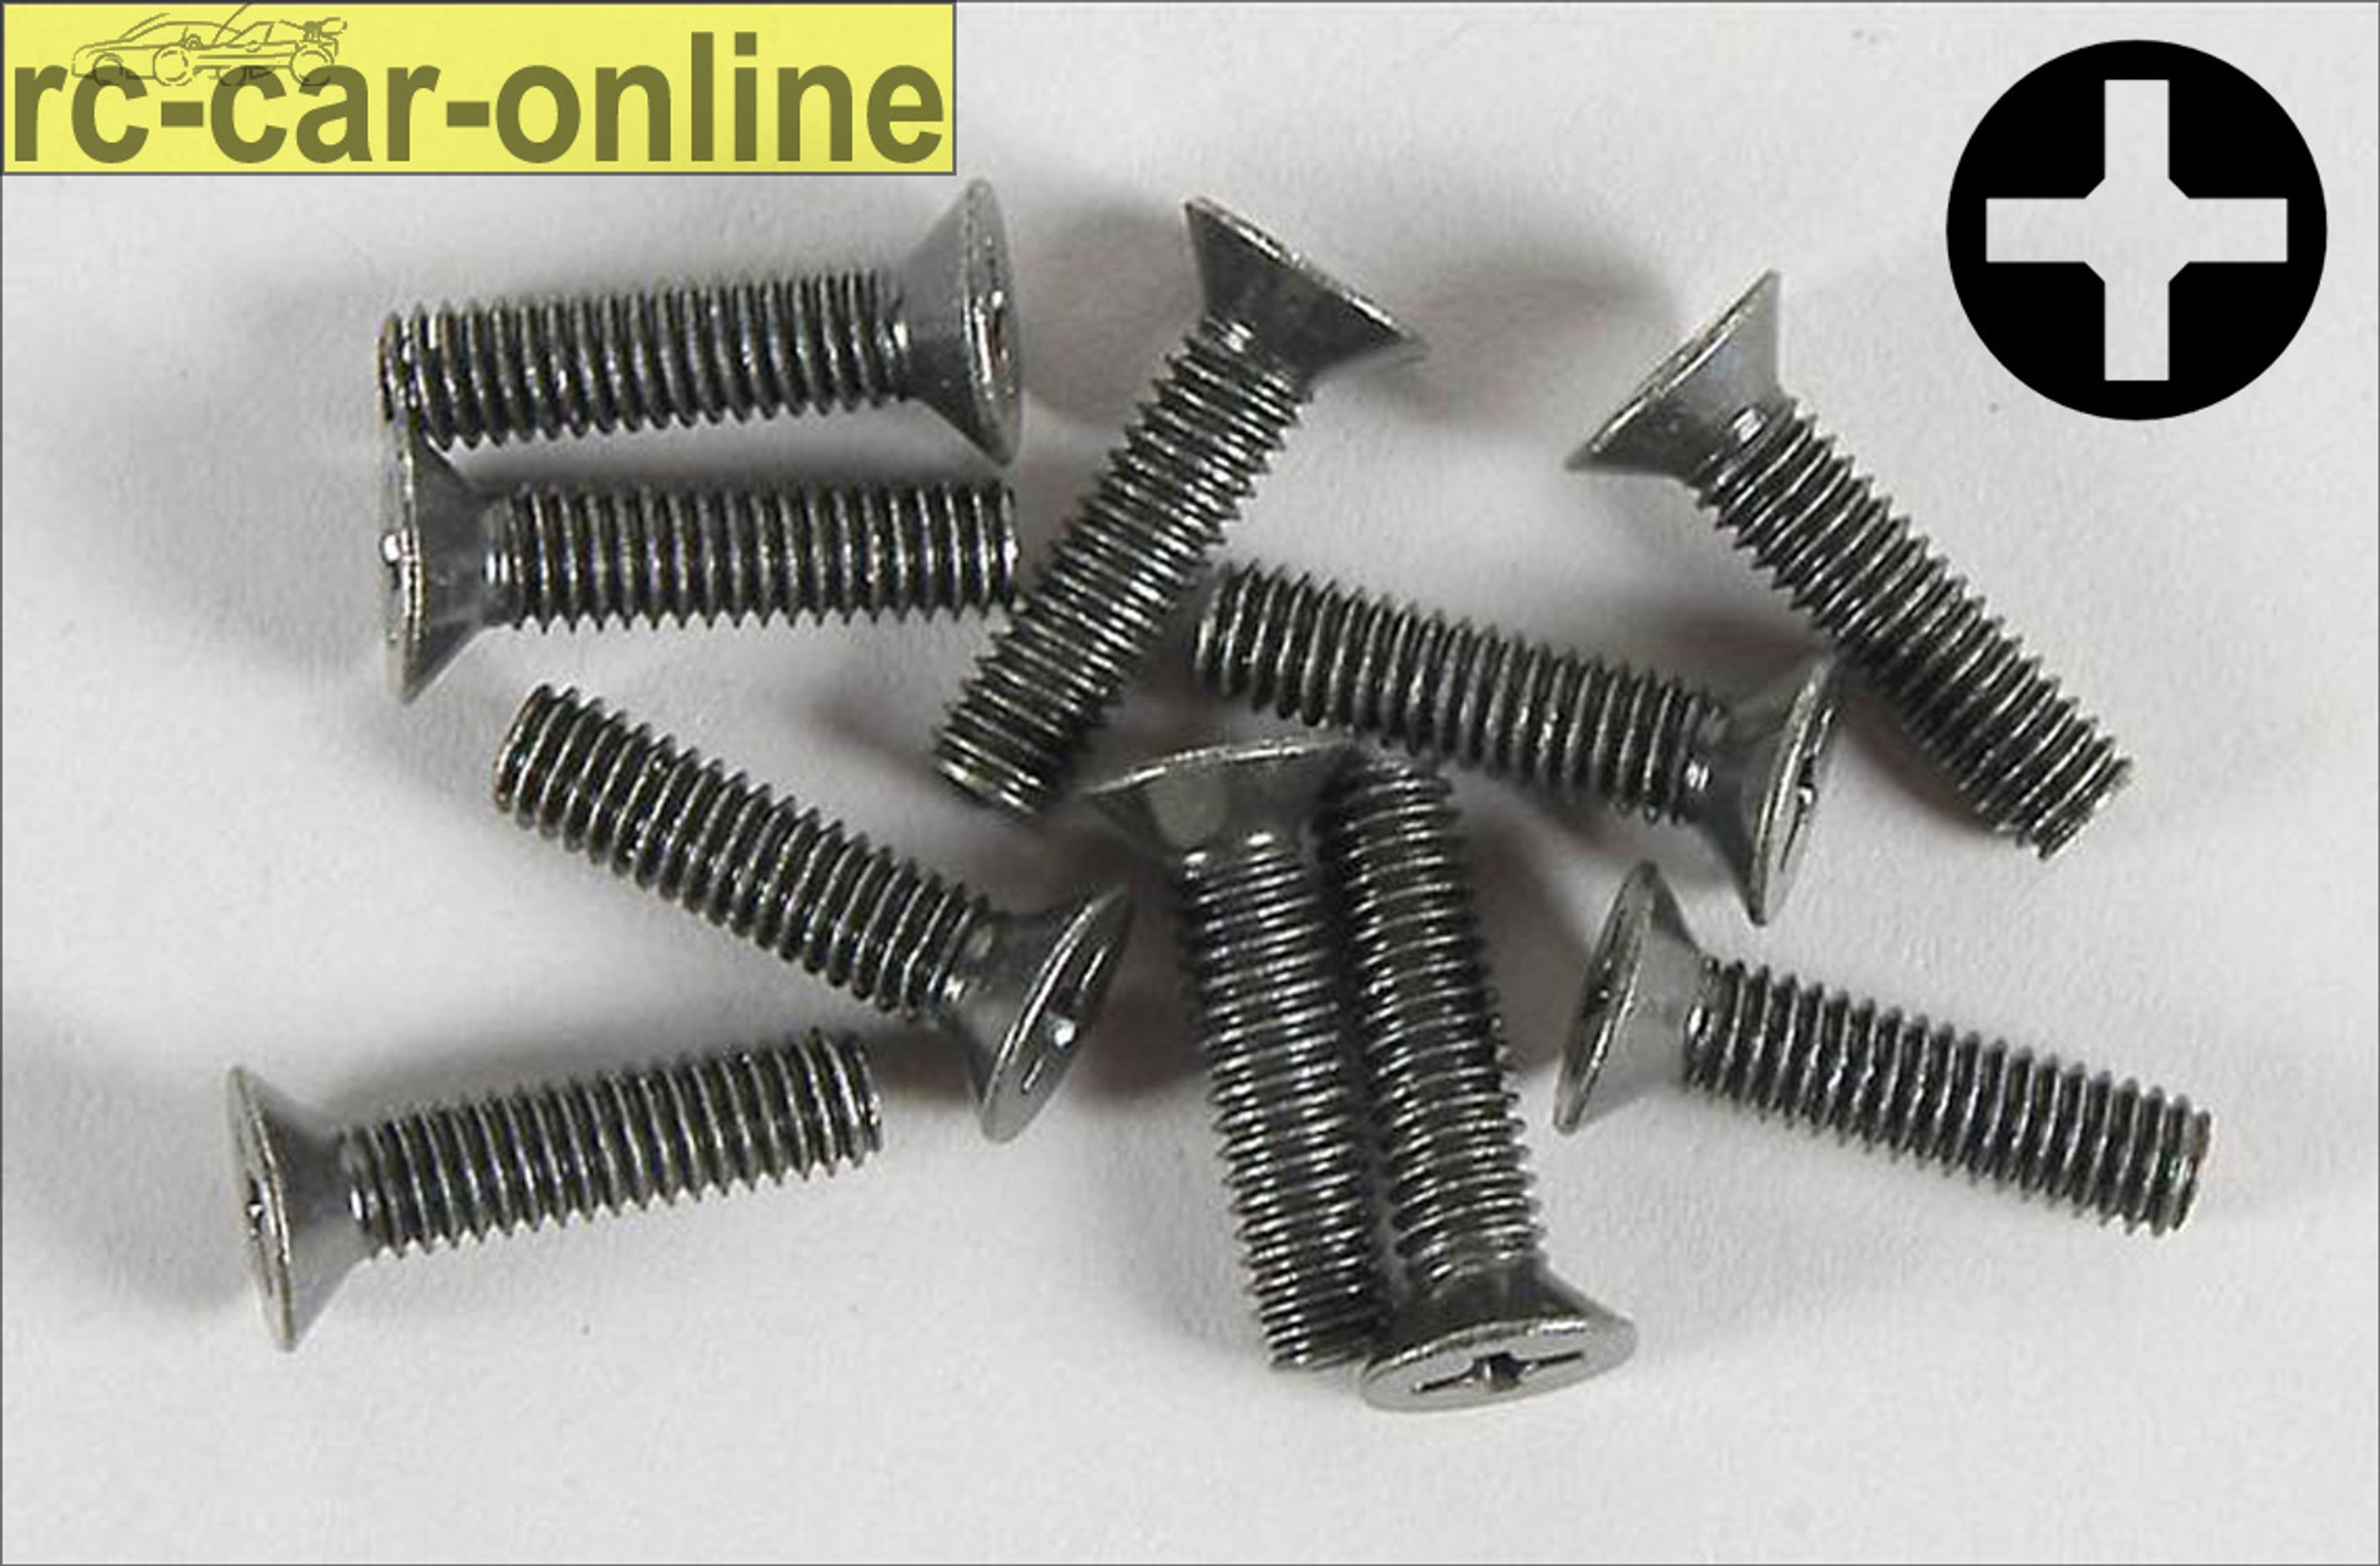 6718/14 FG Countersunk screw with cross recess M4x14 mm, 10 pieces